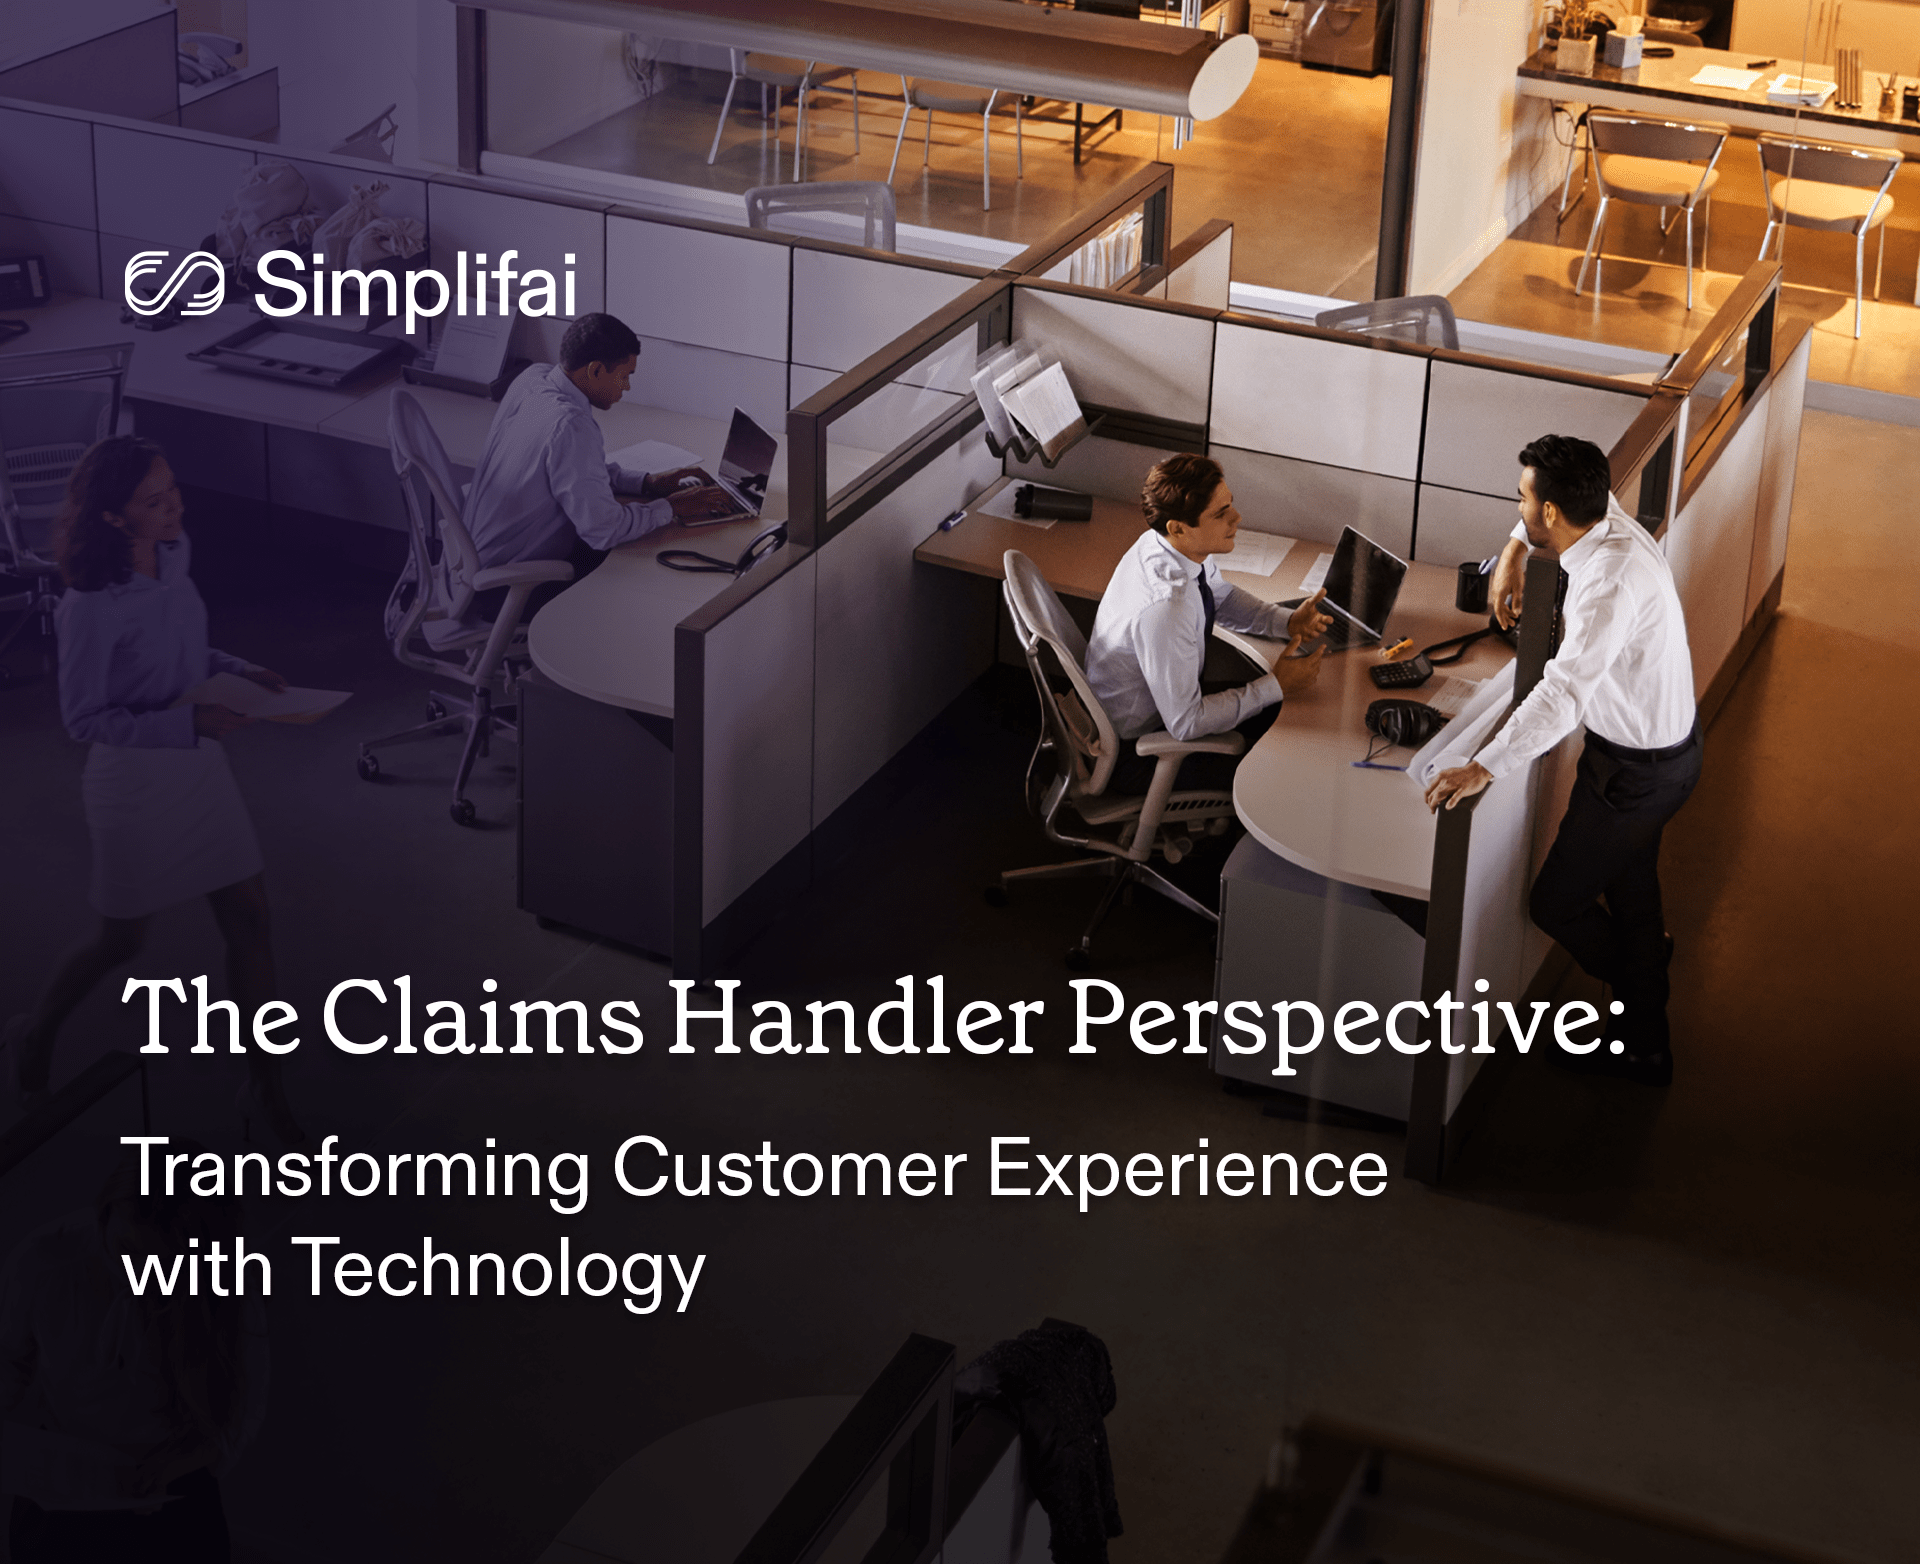 The Claims Handler Perspective: Transforming Customer Experience with Technology